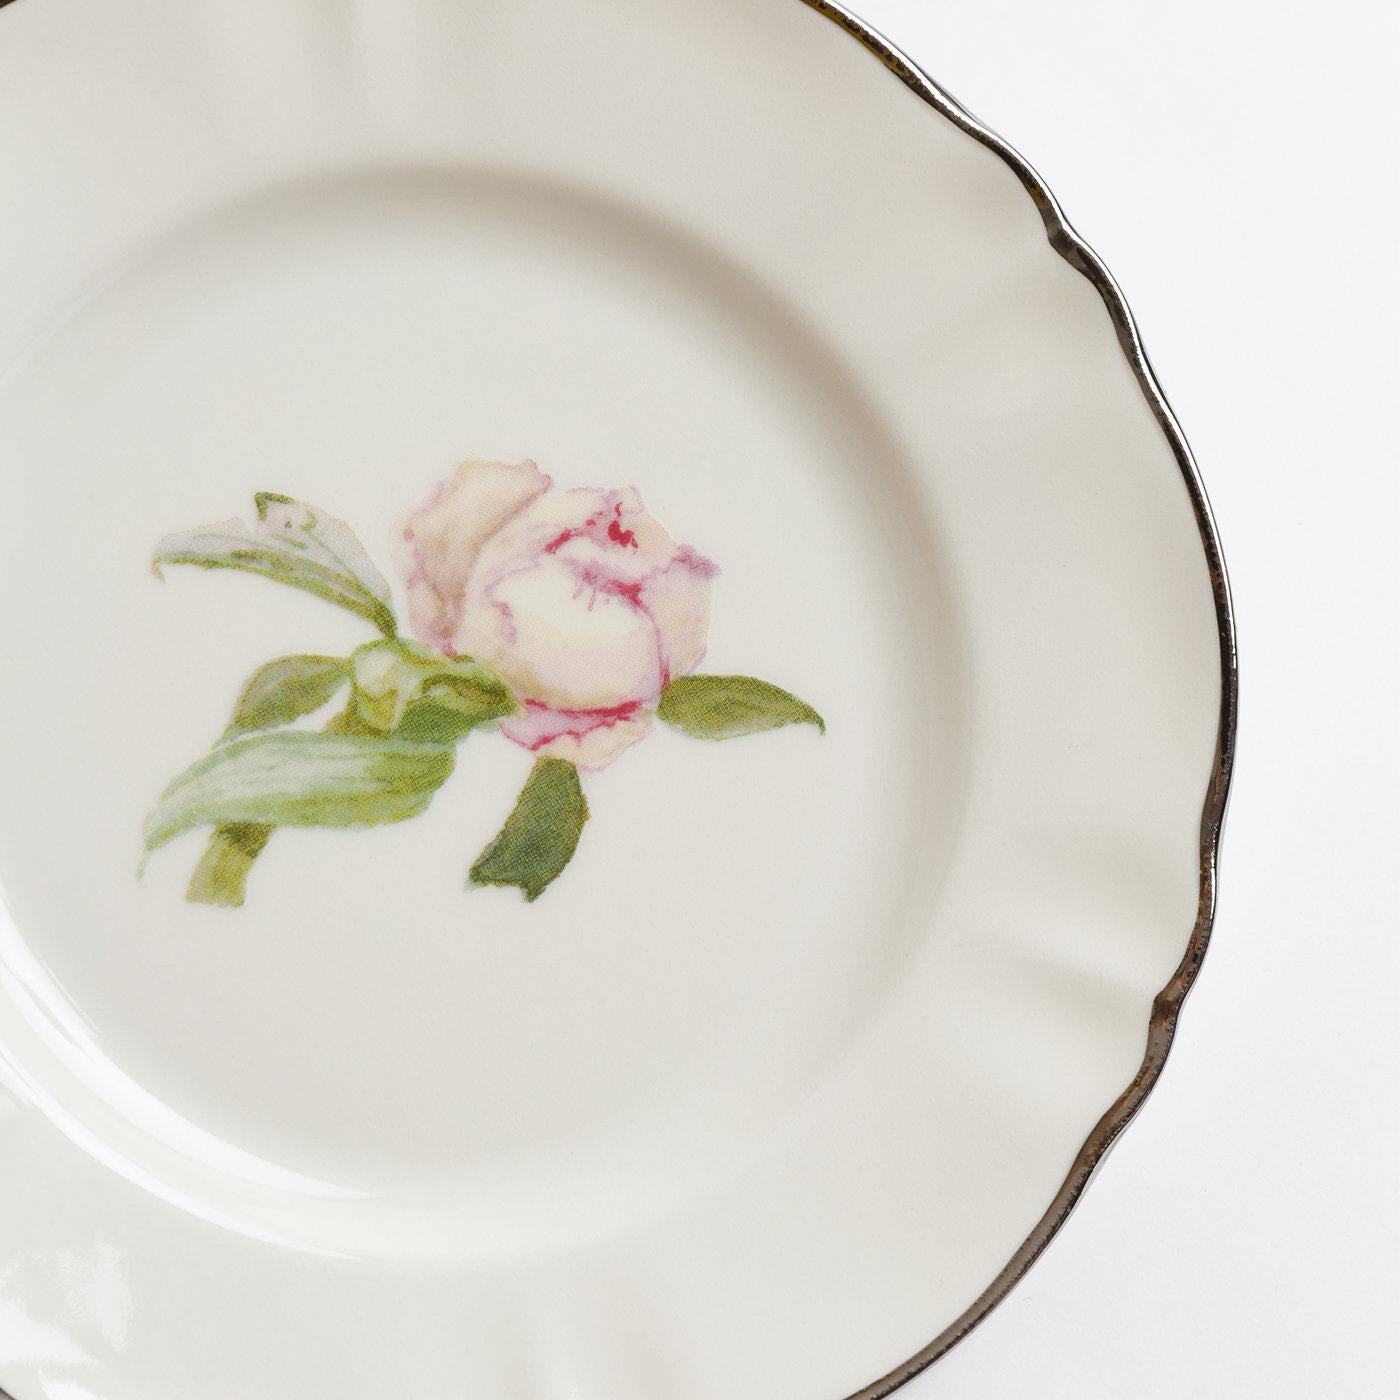 A classic design imbued with a delicate artistic sensibility, this set of four plates designed to serve bread on elegant occasions is entirely crafted of top-rate ivory porcelain and painted by hand. The slightly-reddened, blooming white peony